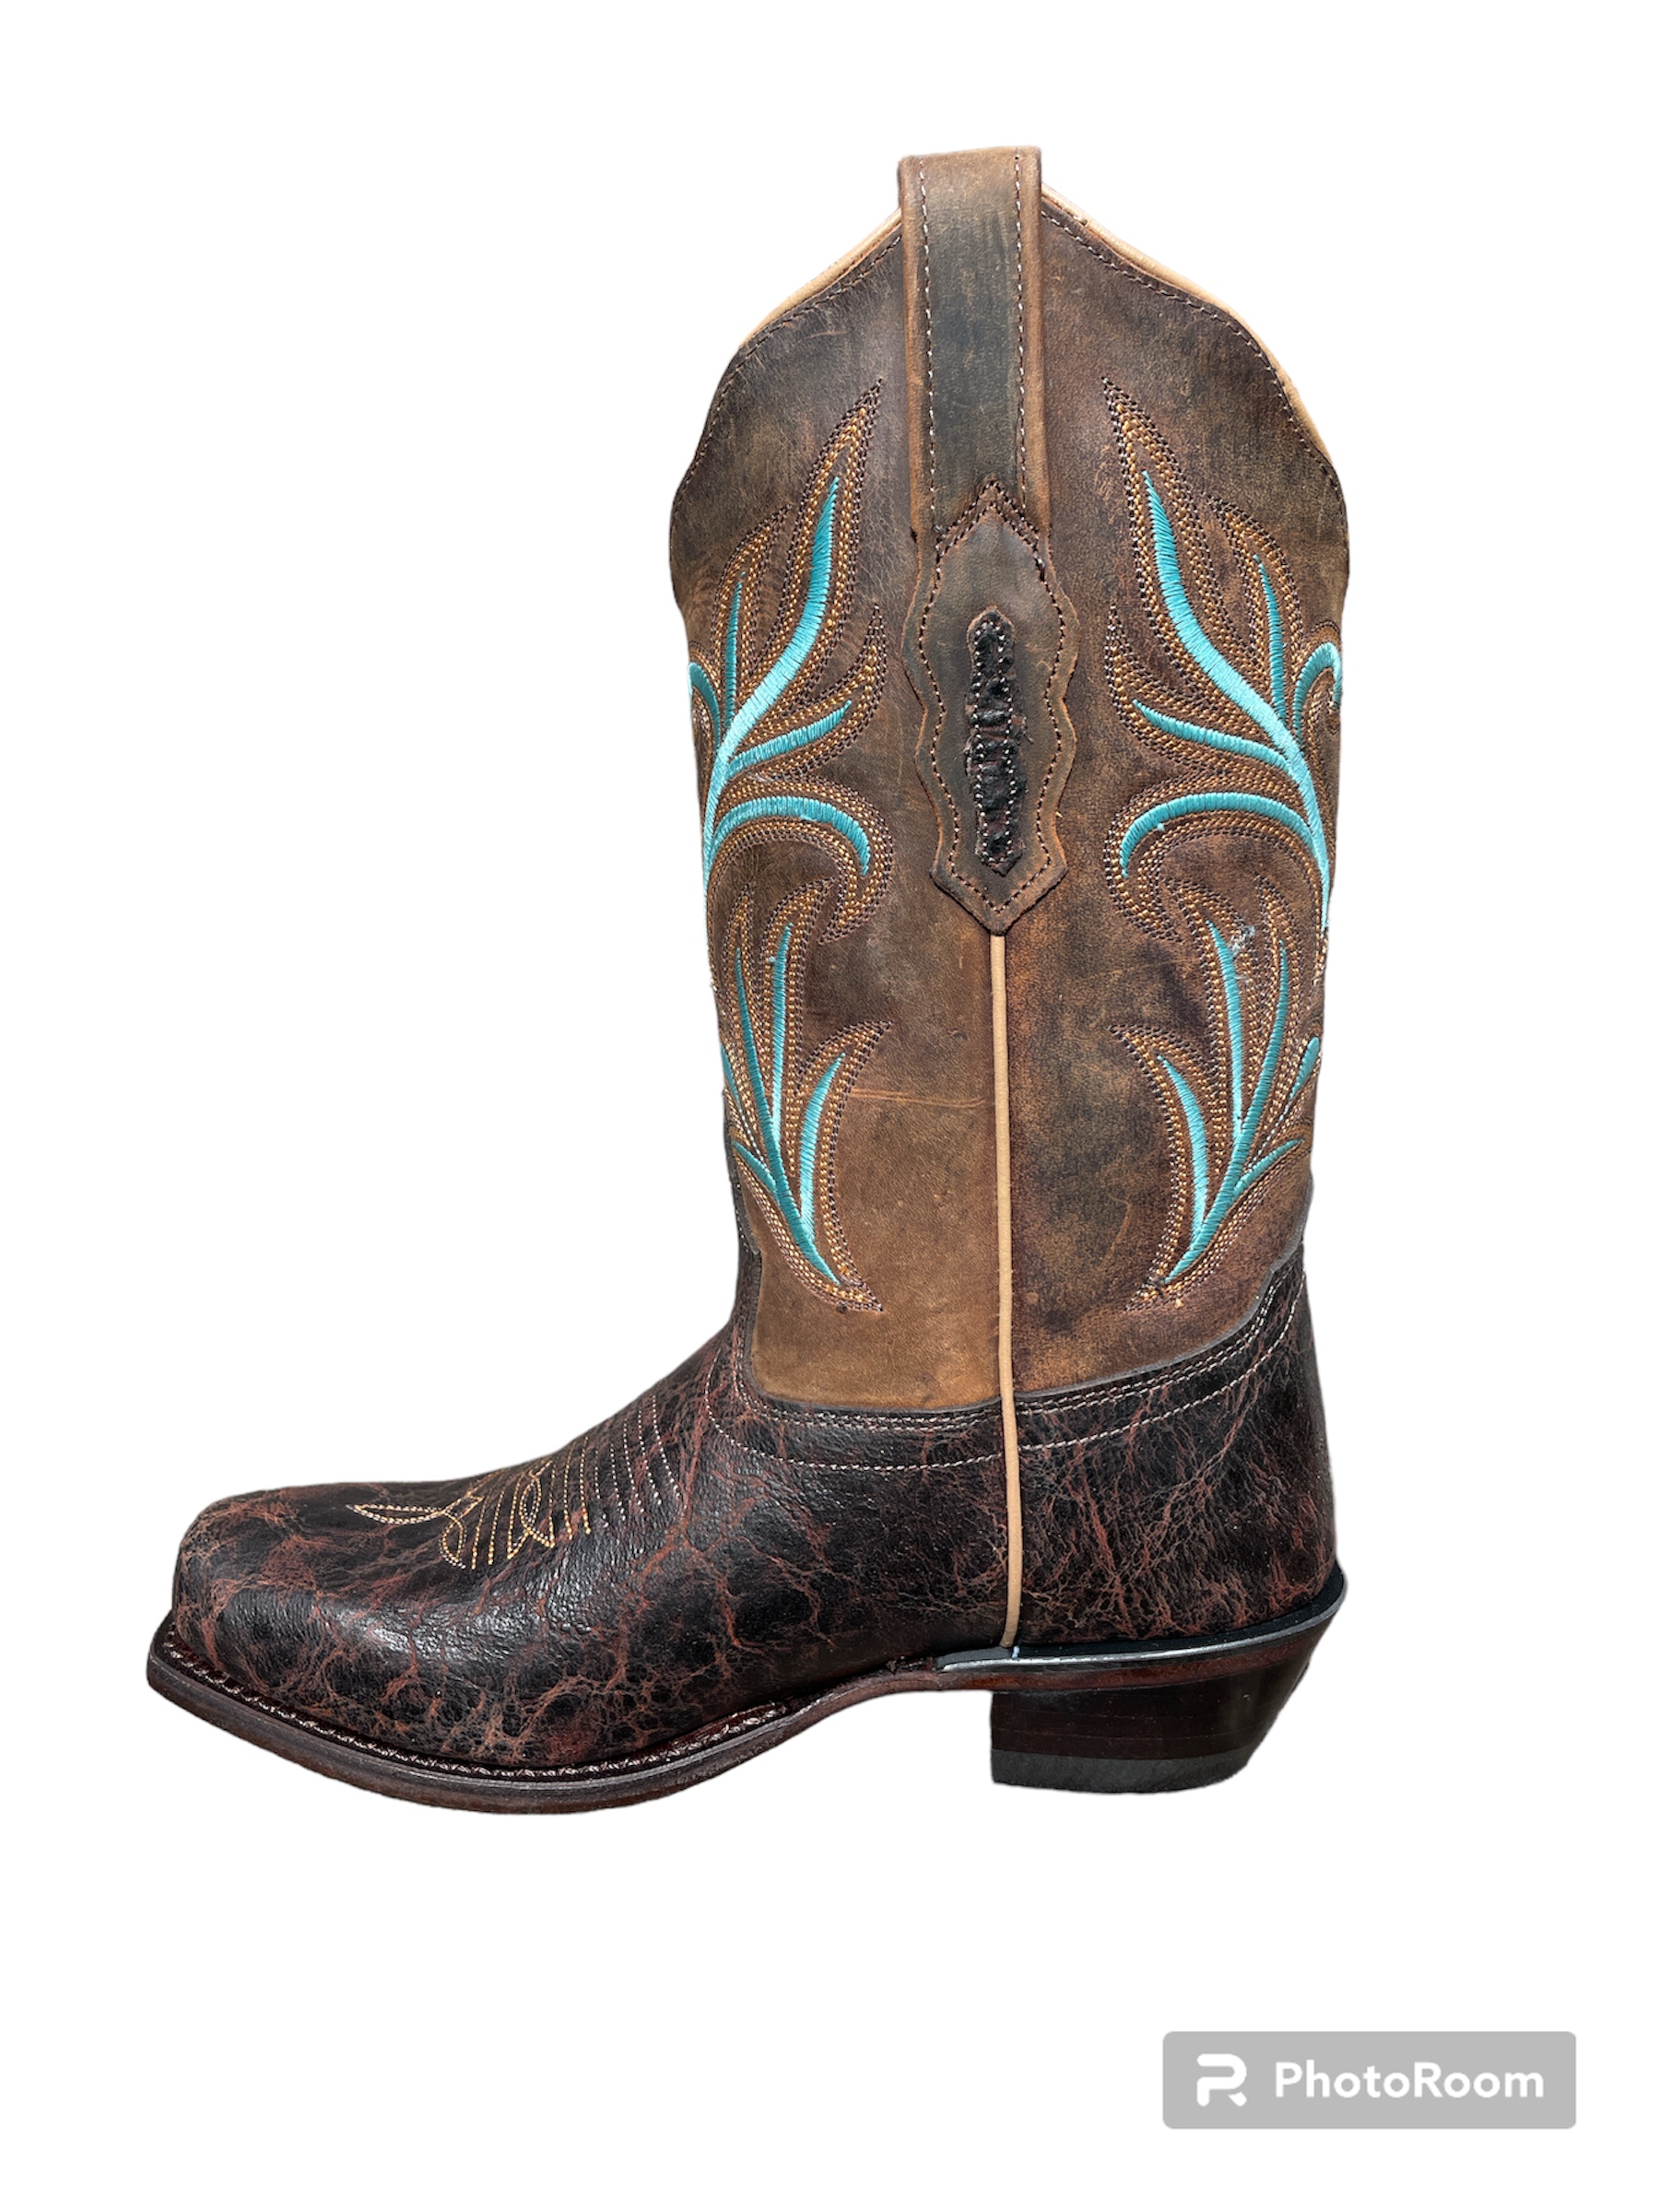 Cowboy boots ladies 18010E, brown, turquoise embroidery, B-WARE